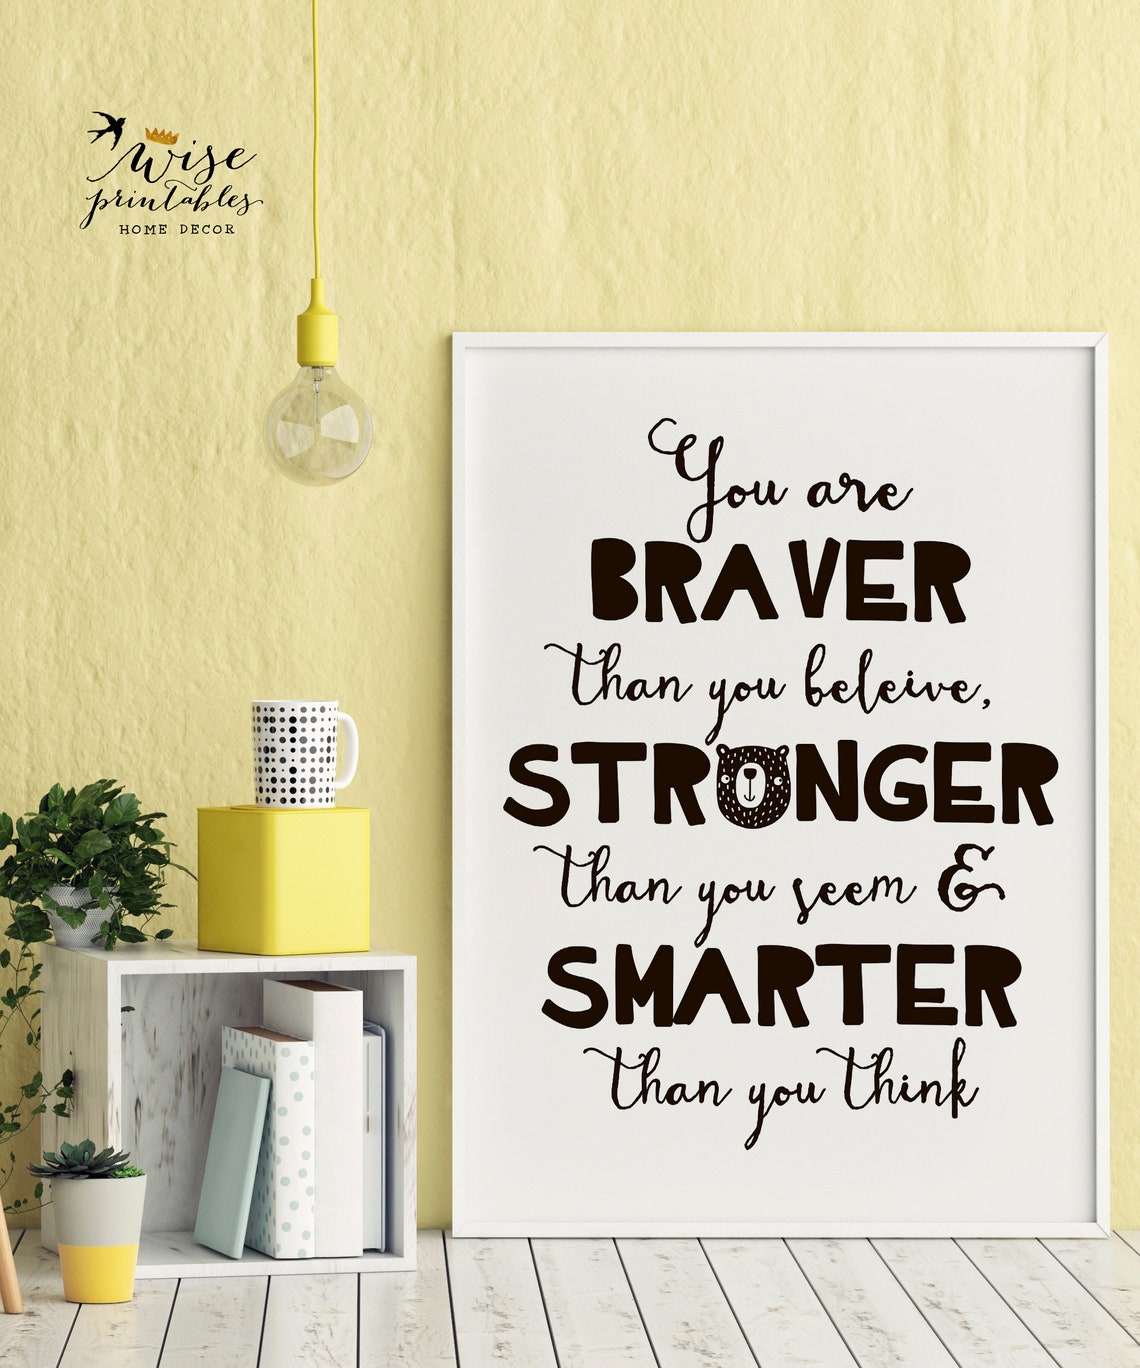 You are Braver Smarter Stronger Winnie the Pooh quote decor | Etsy